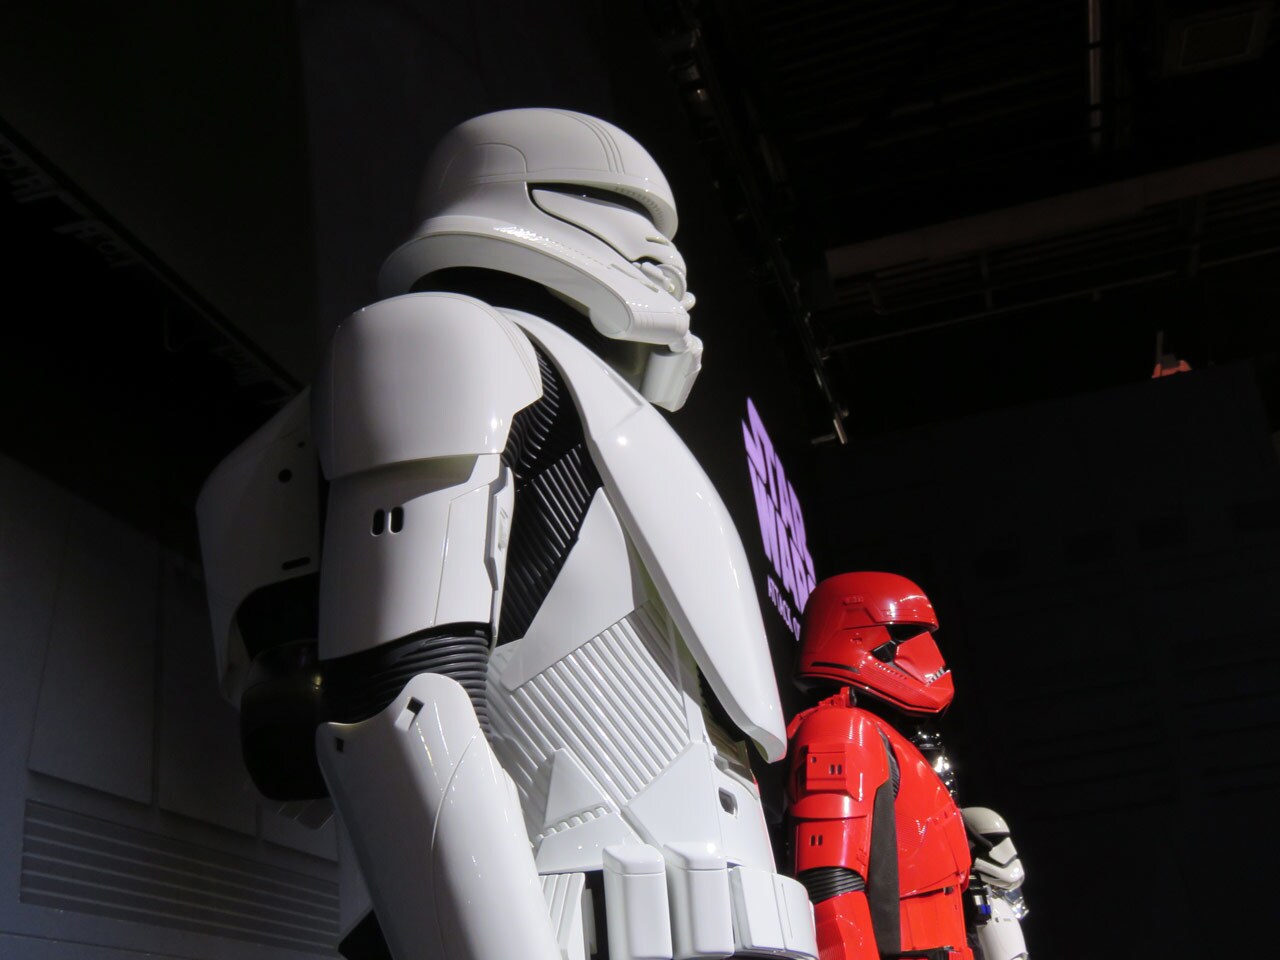 A new jet trooper and Sith trooper from Star Wars: The Rise of Skywalker.